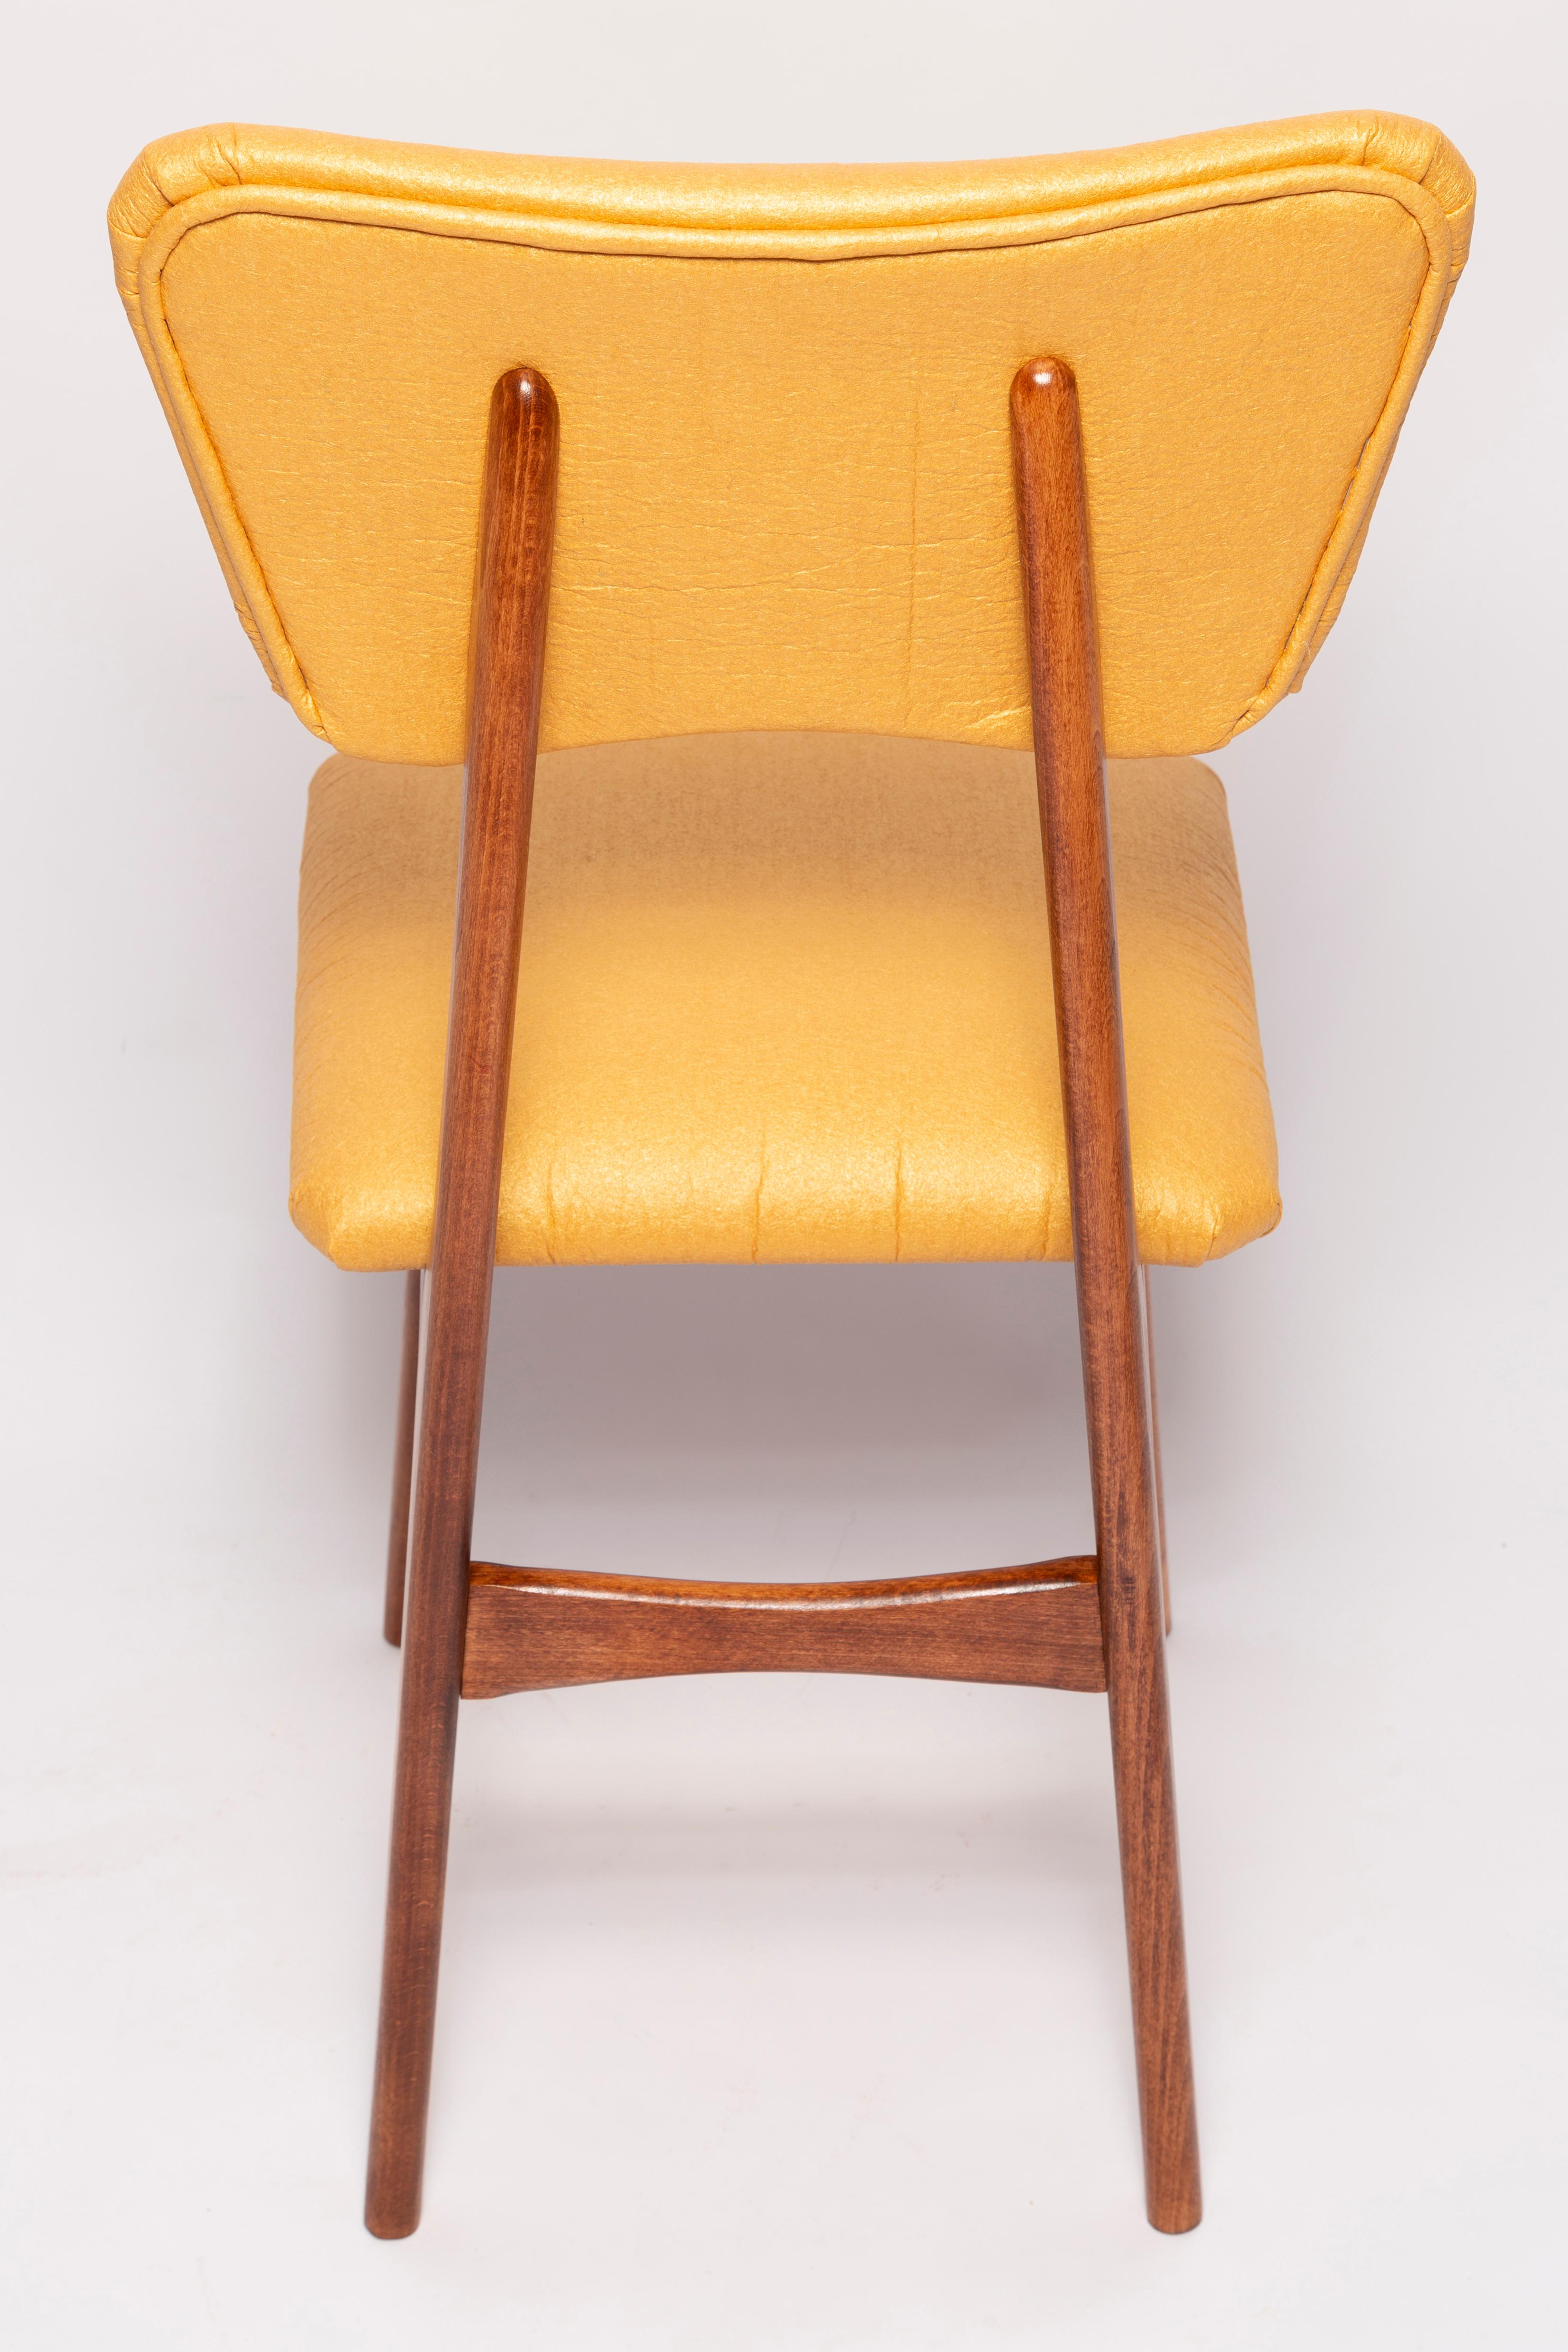 Set of Four Mid Century Butterfly Dining Chairs, Pineapple Leather, Europe 1960s For Sale 7